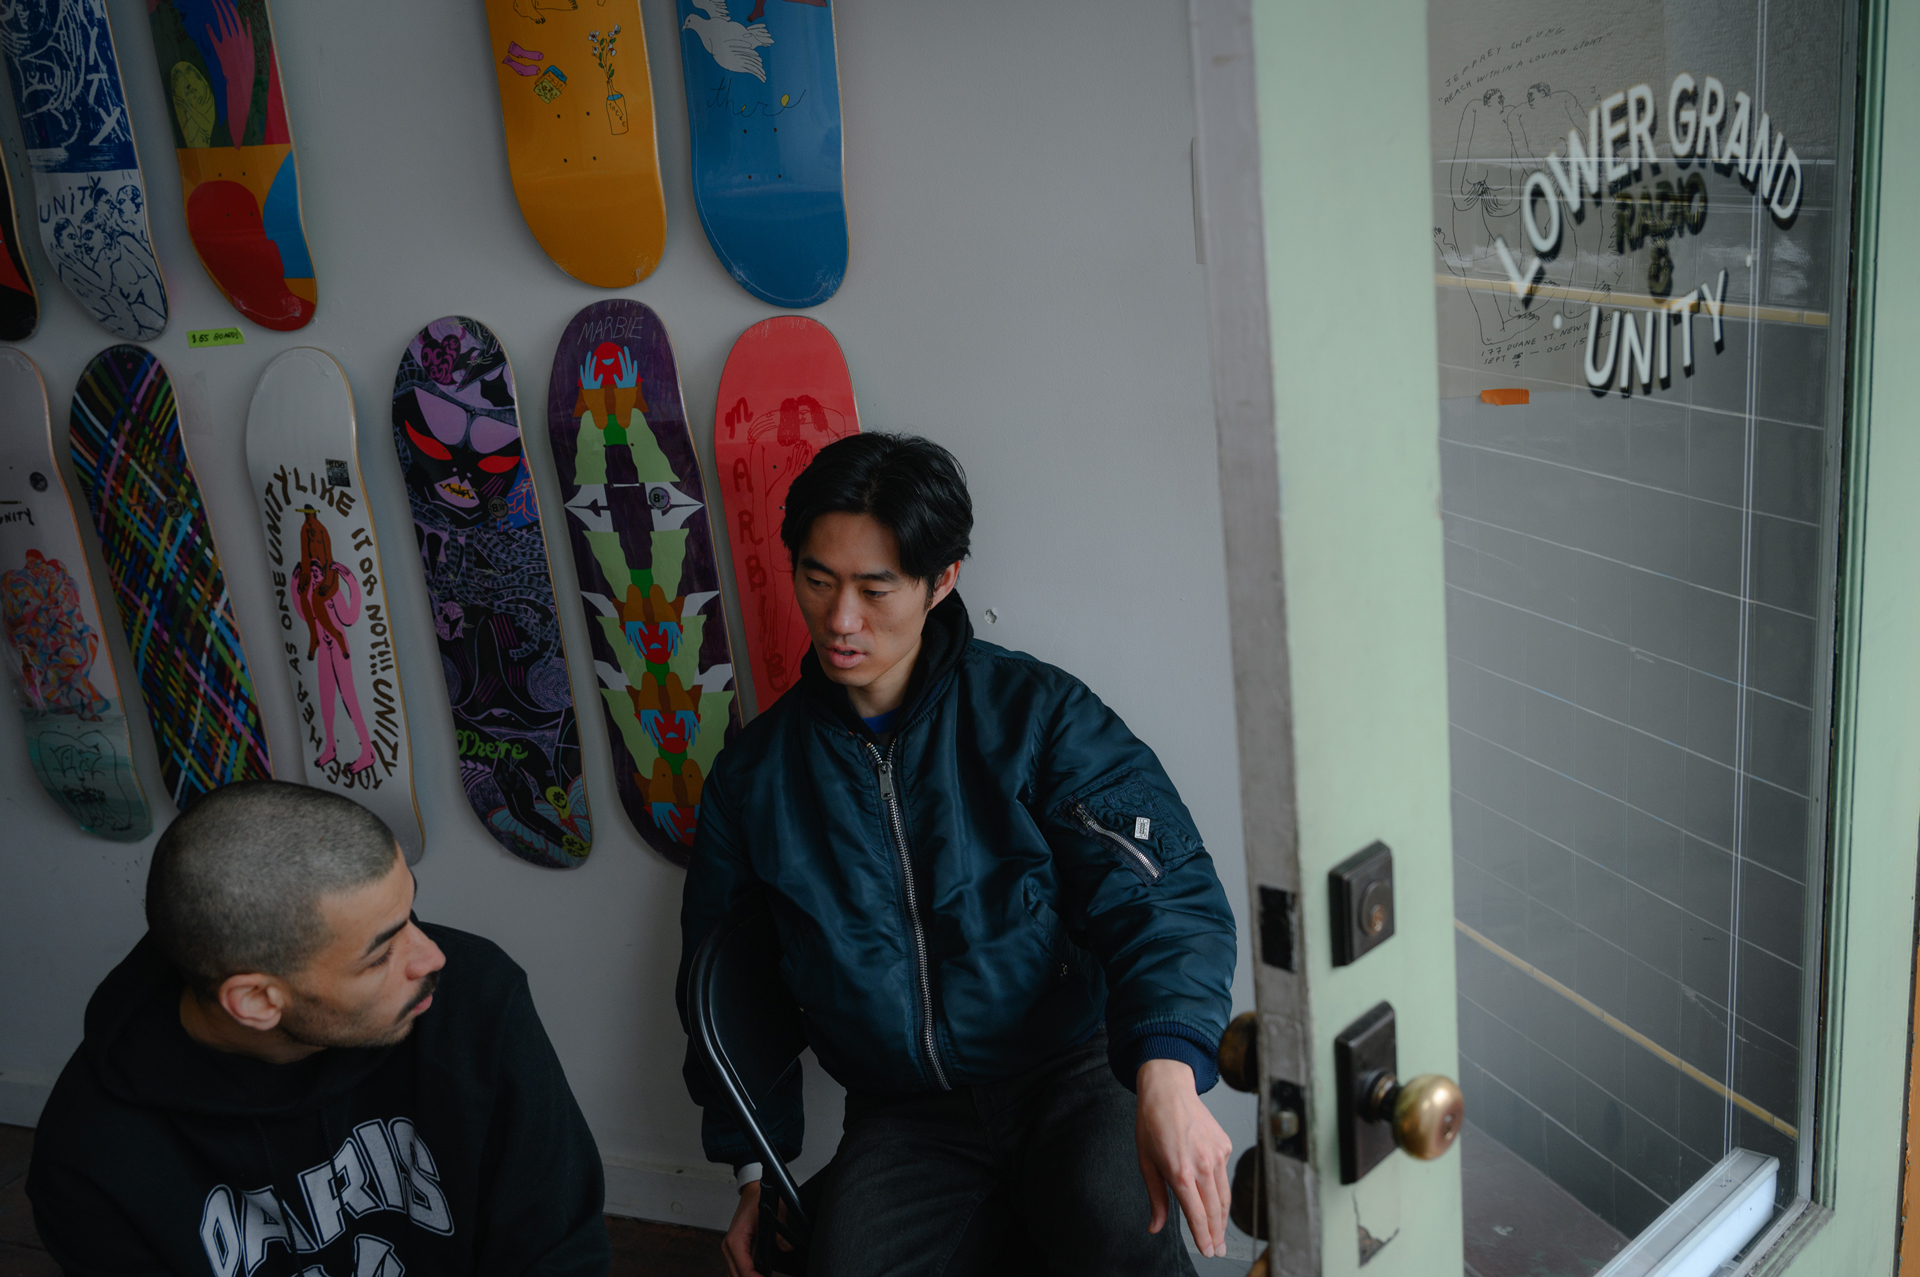 Two men stand in front of wall of skateboards with front door open to right